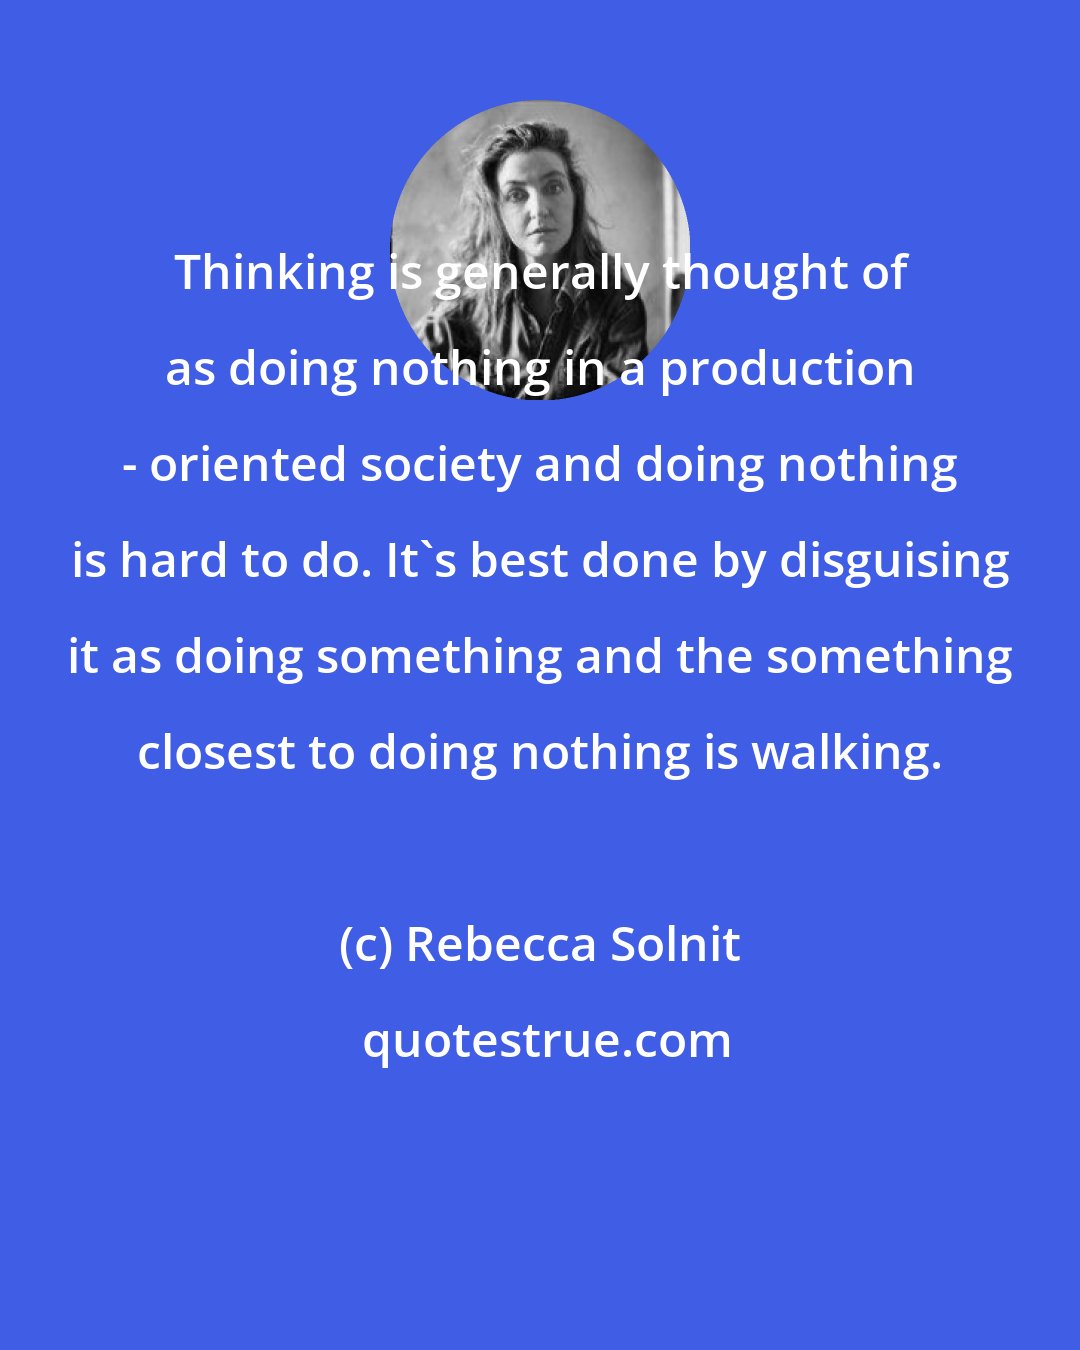 Rebecca Solnit: Thinking is generally thought of as doing nothing in a production - oriented society and doing nothing is hard to do. It's best done by disguising it as doing something and the something closest to doing nothing is walking.